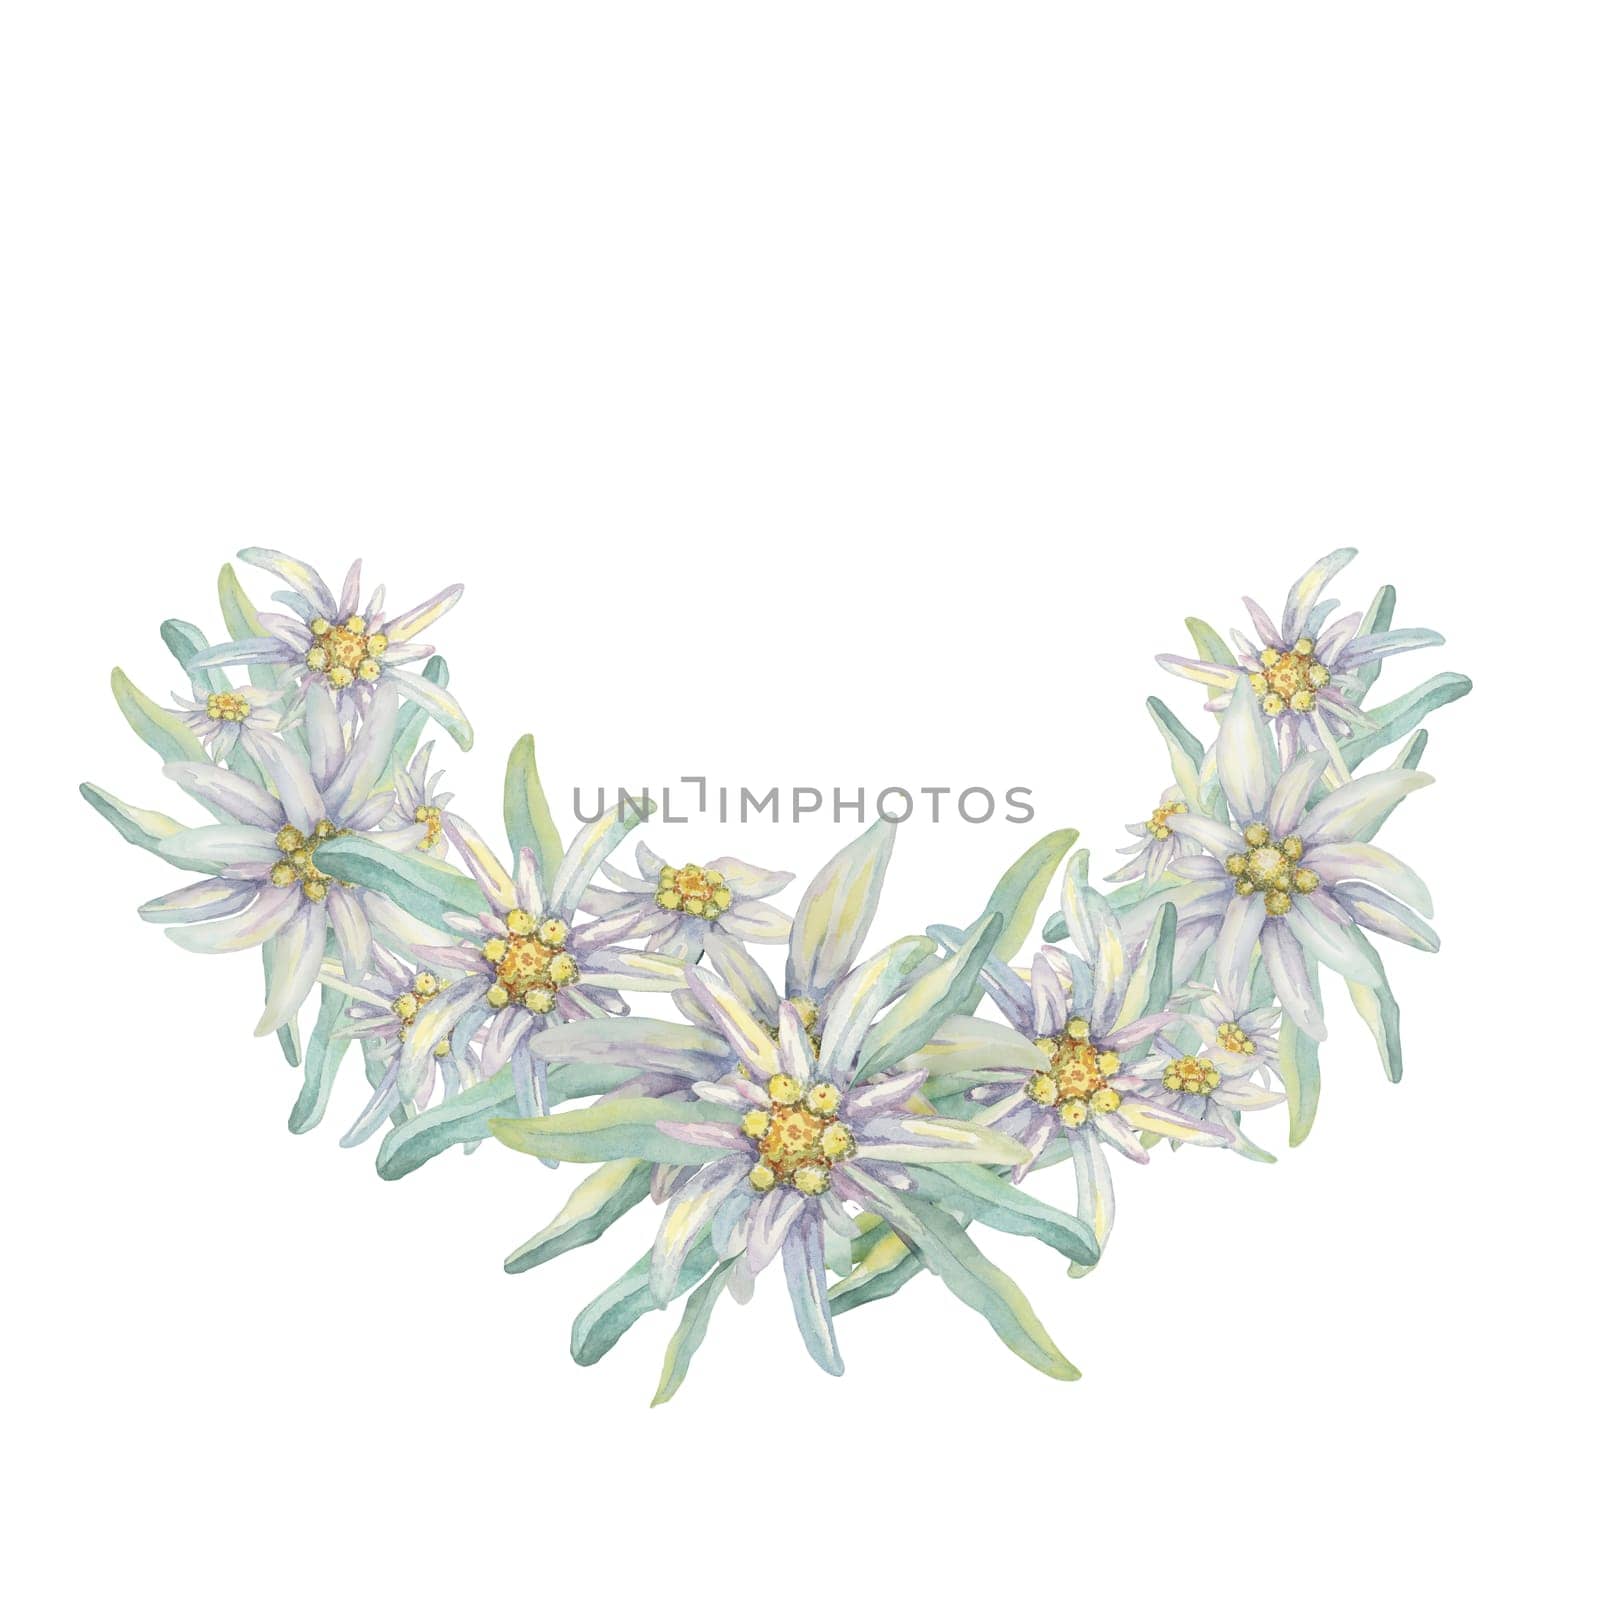 Round wreath of edelweiss flowers. Hand drawn watercolor clipart, minimalistic floral style in pastel colors. Design template for postcard, invitation, printing, weddings, isolated on white background